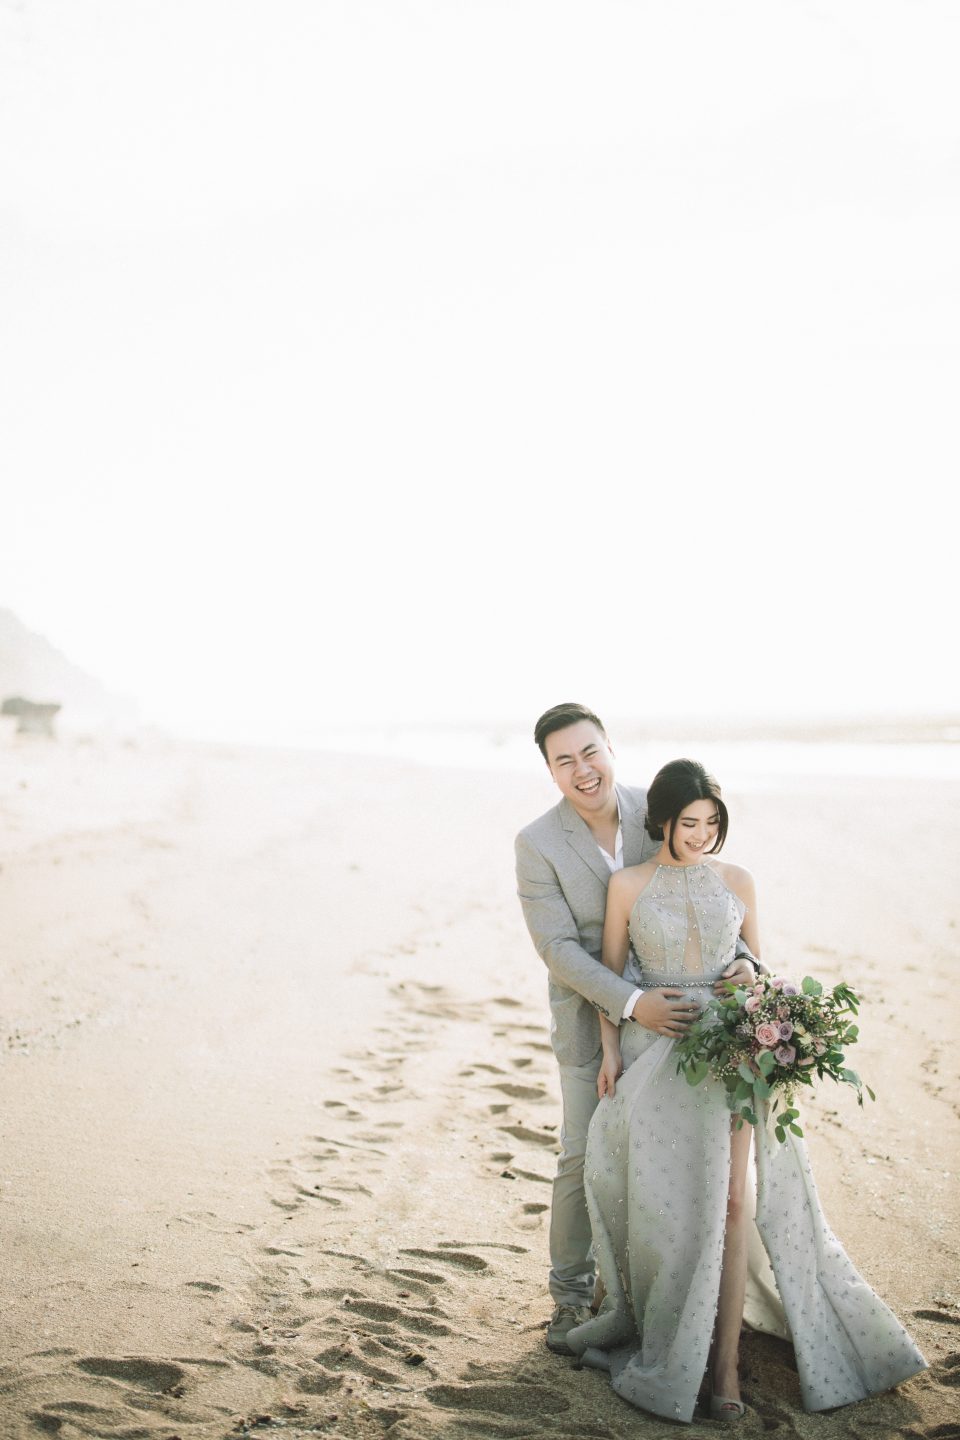 Michelle and her fiance Aloysius took their wedding photos in Bali